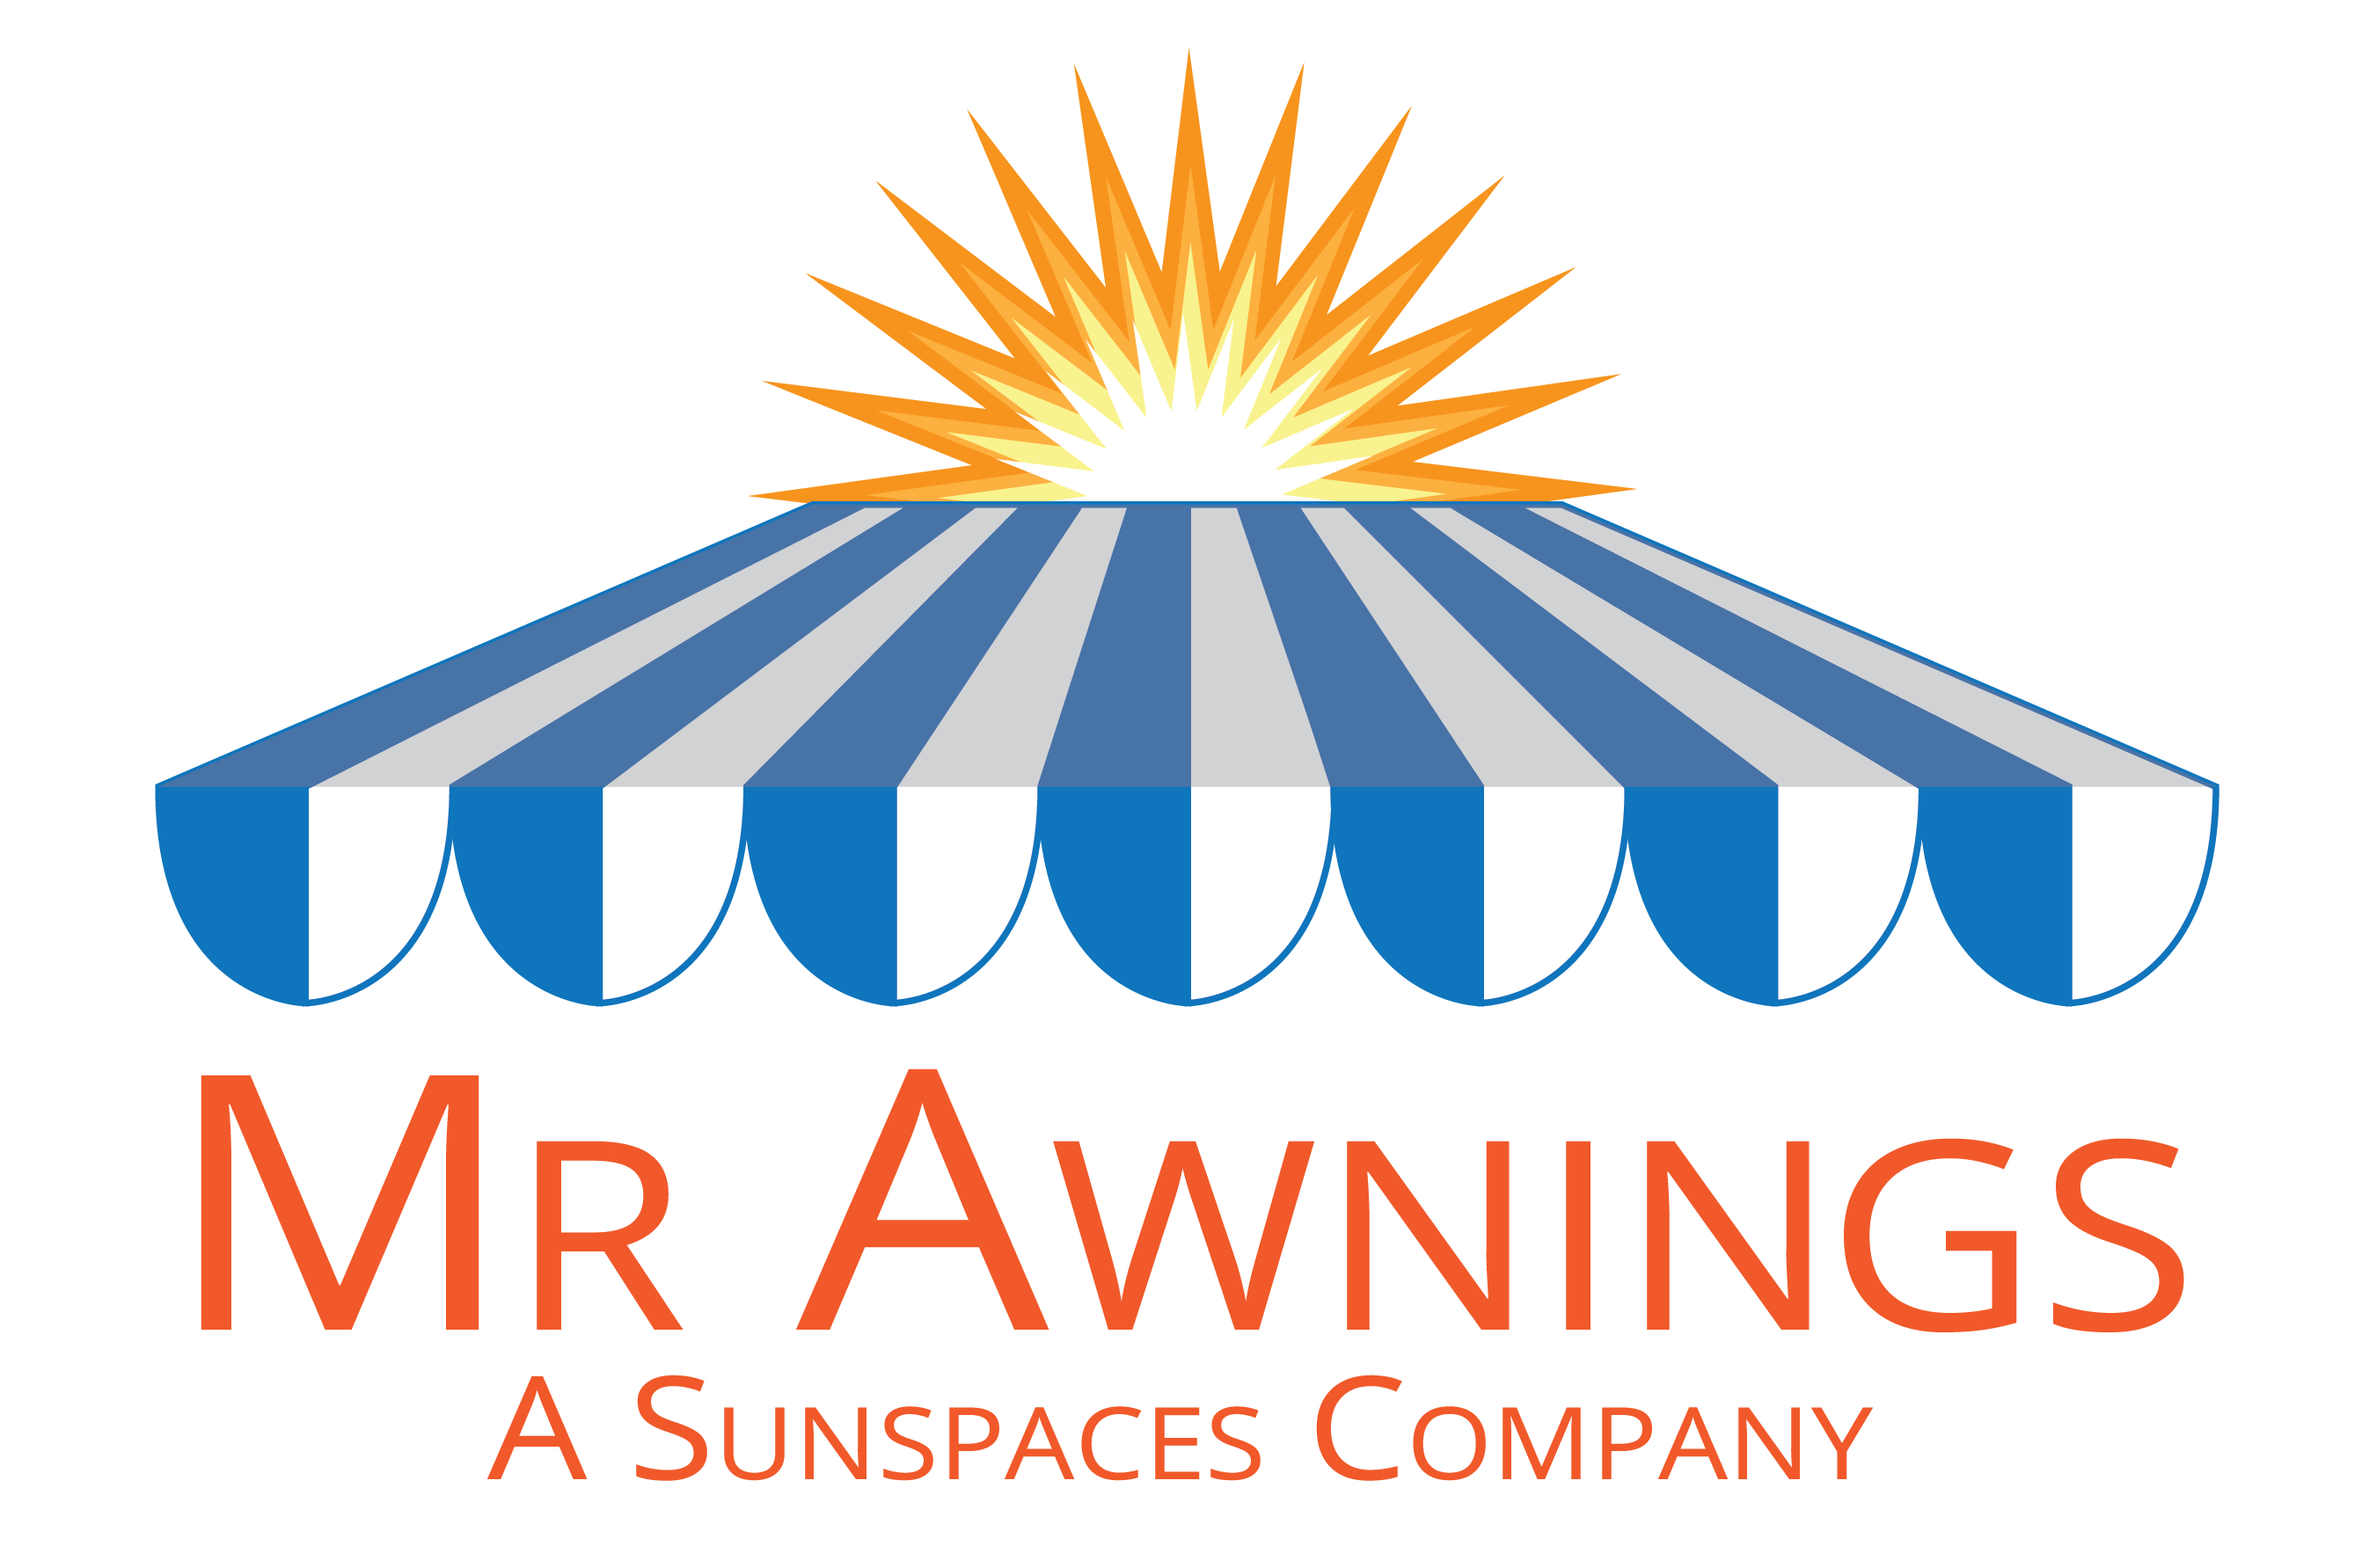 Mr Awnings - A Sunspaces Company